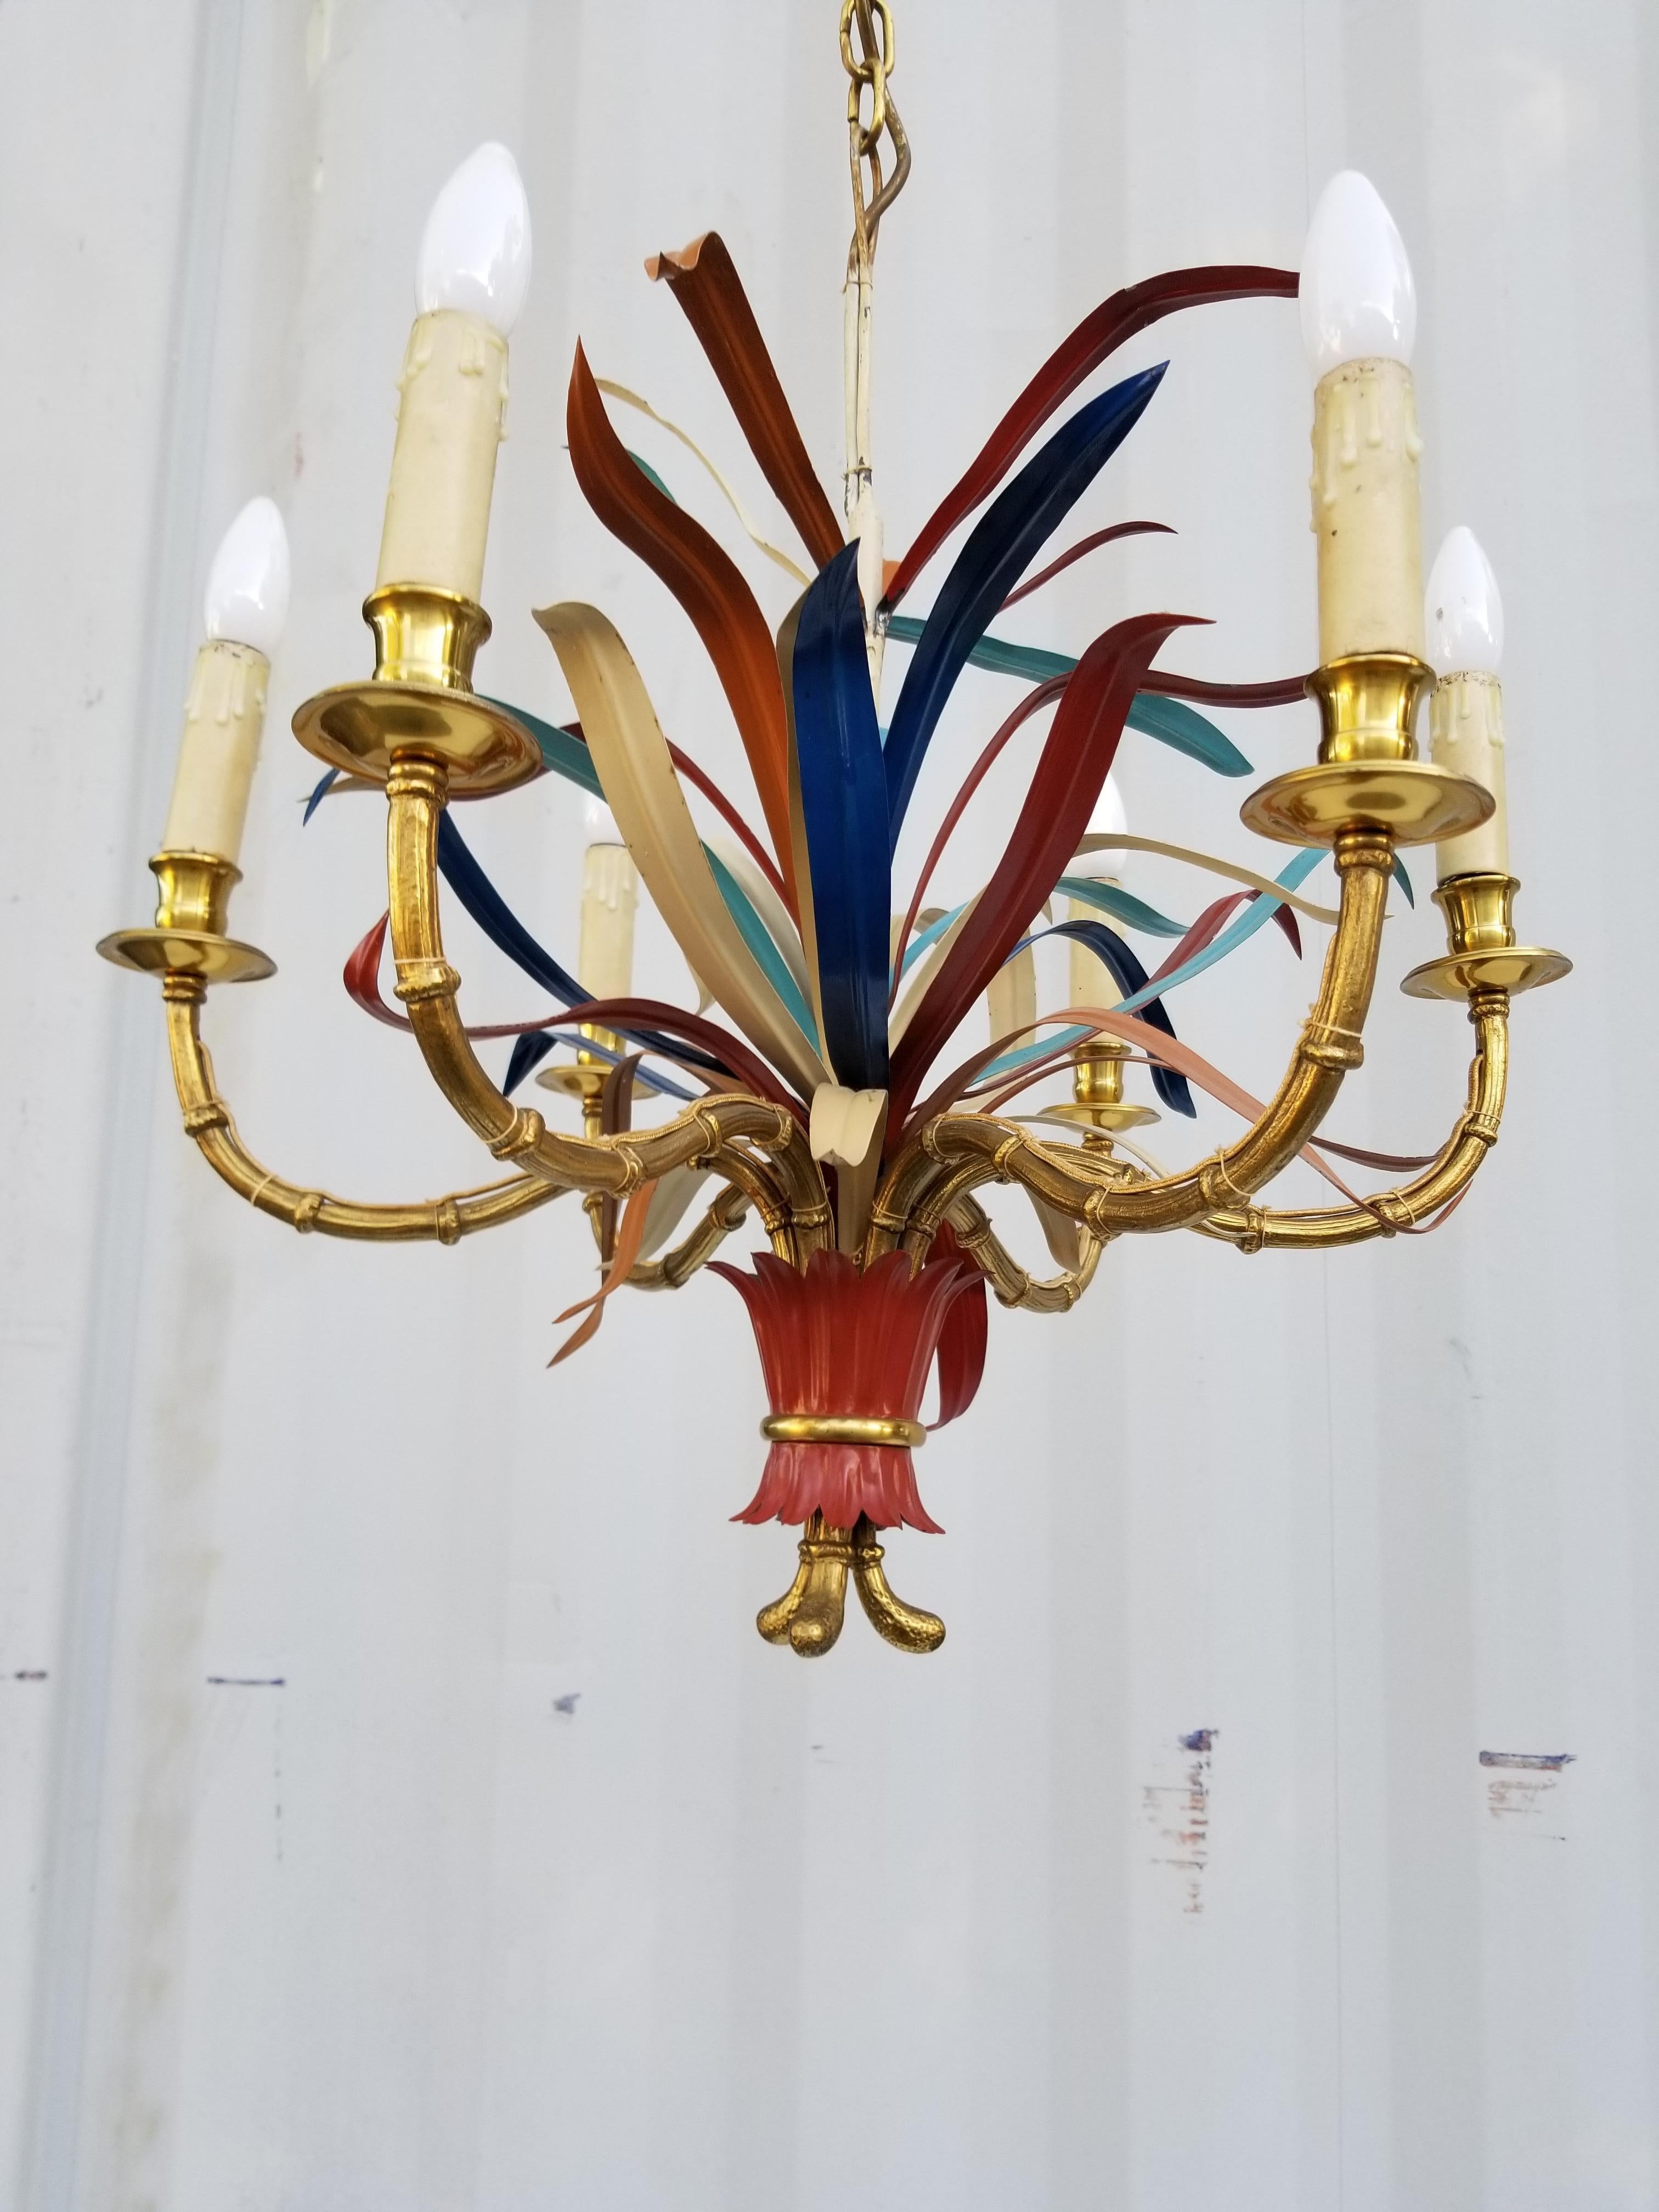 Superb Maison Baguès 6 lights chandelier, great bronze quality.
Matching pair of 3 light sconces, from the same house.